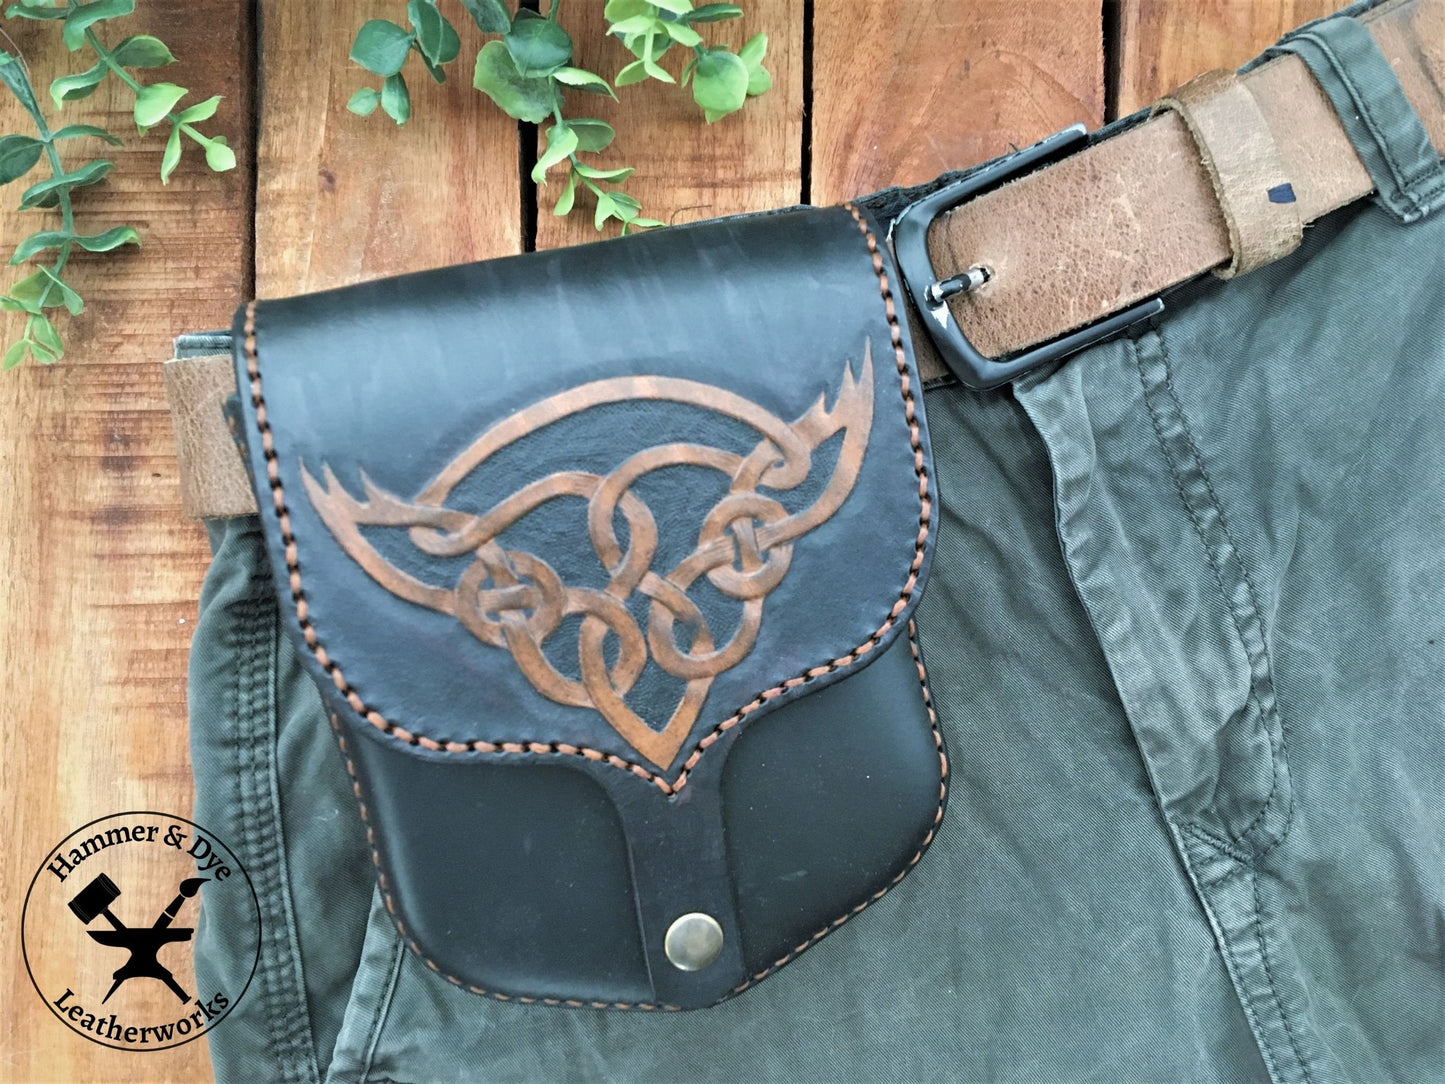 Handmade Black Leather Belt Pouch with Hand Carved Celtic Knotwork Design on a trouser belt